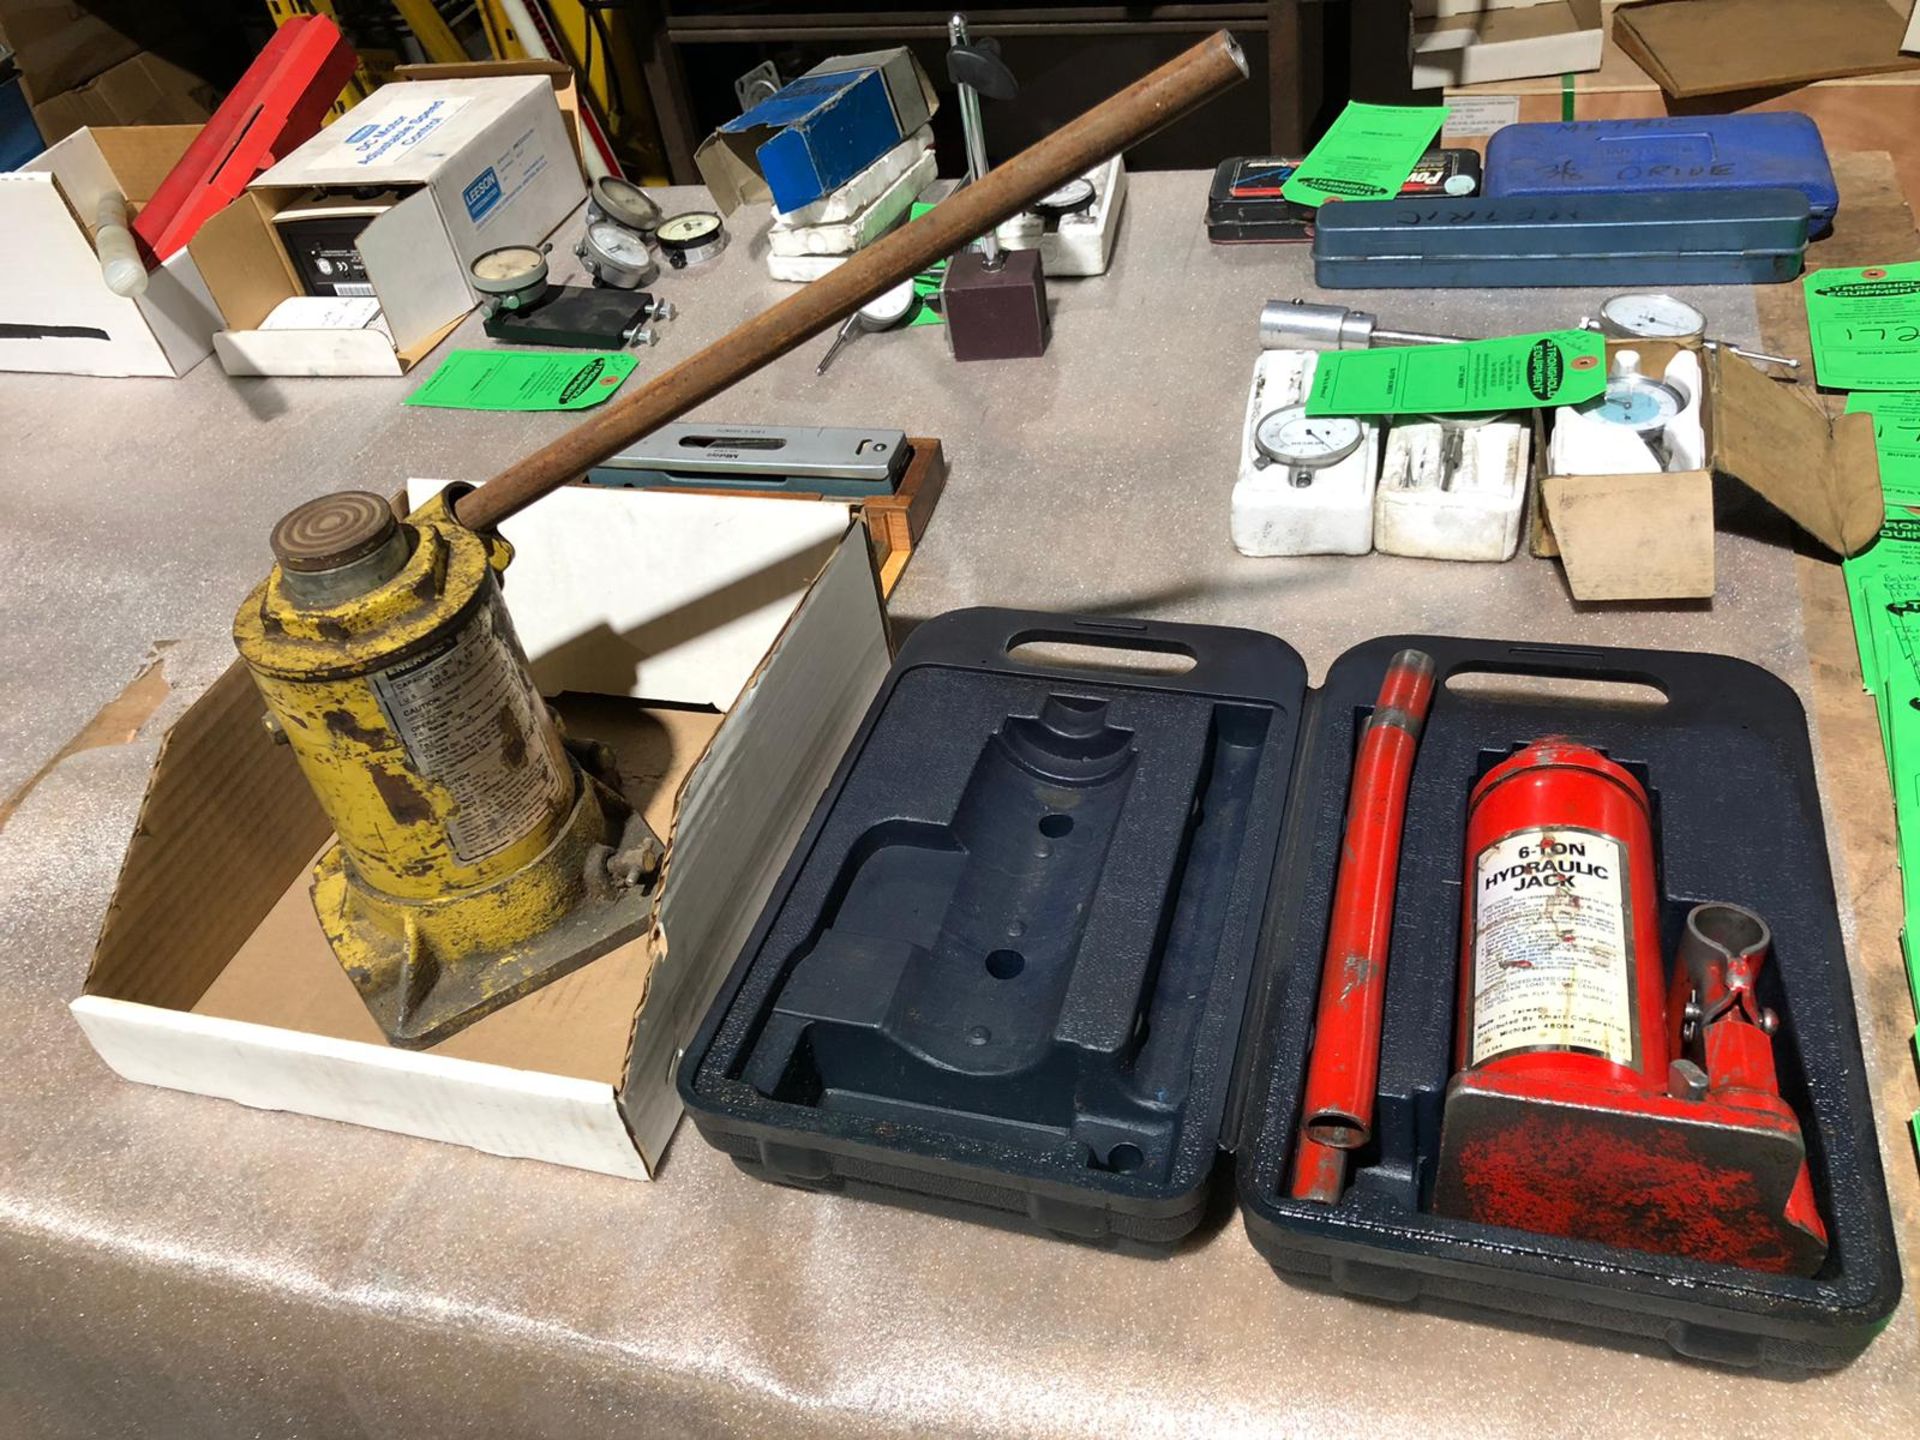 Lot of 2 (2 units) Enerpac JH-12 Hydraulic Cylinder Jack 10.9 Metric Tons with 5.12" stroke & 6